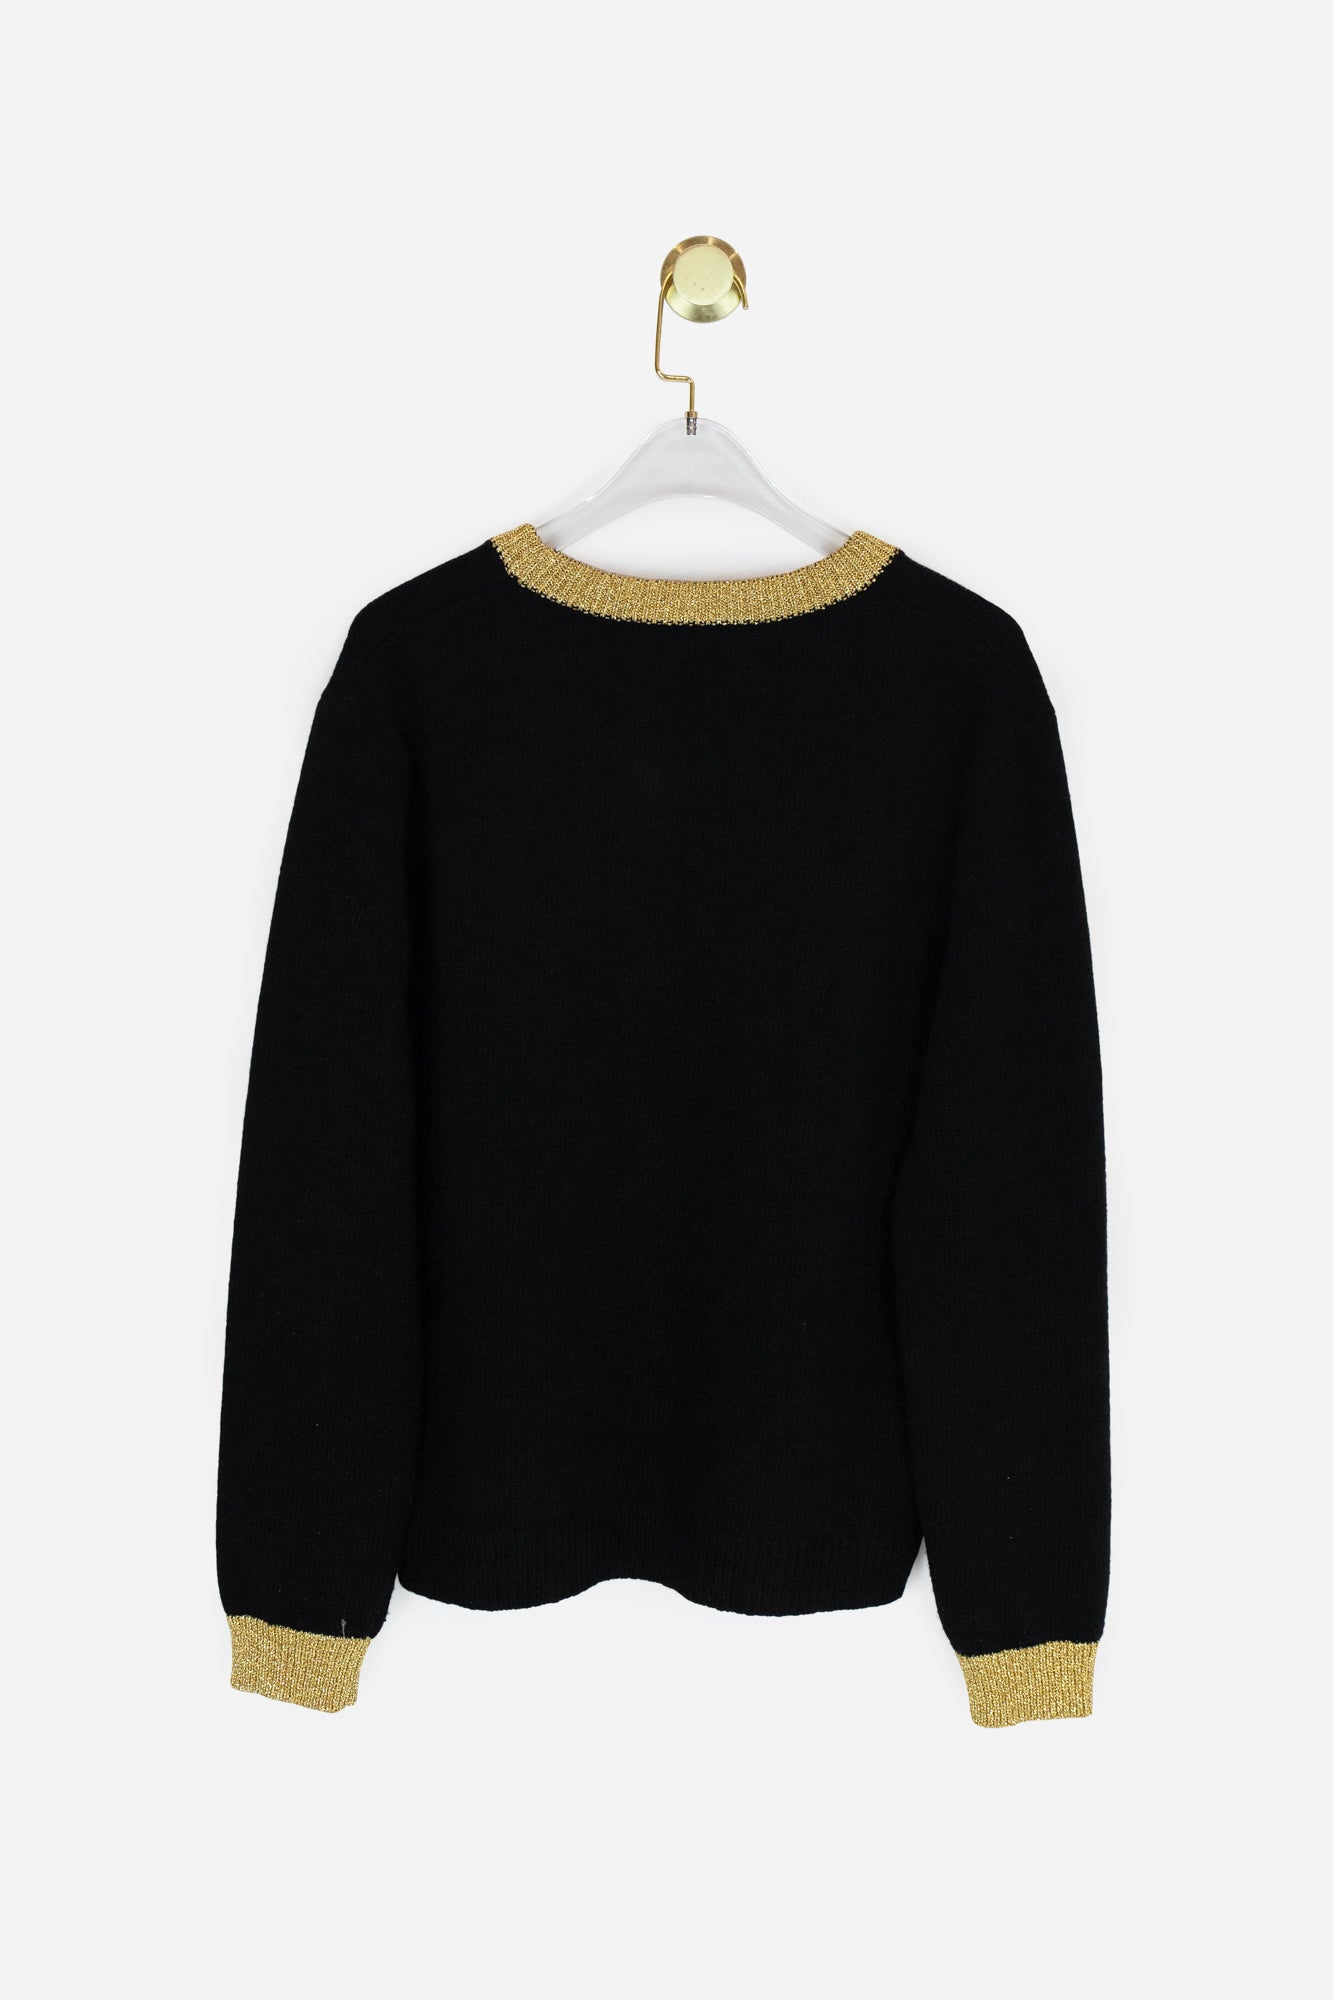 Black Knit Sweater "What Are We Going To Do With All This Future?"